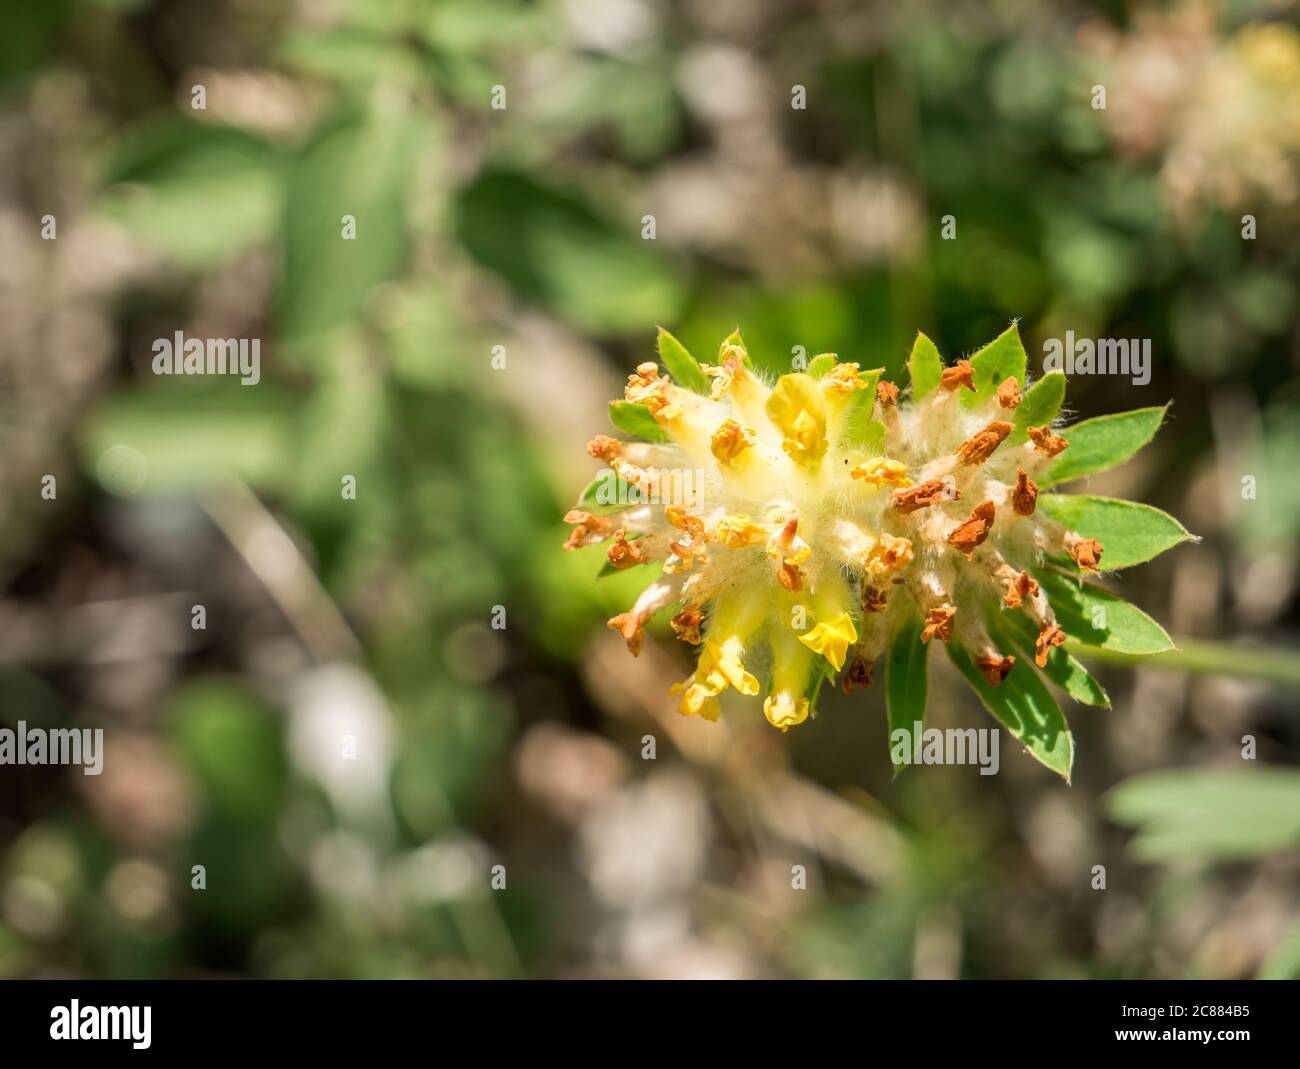 Close up of a Anthyllis vulneraria or Kidney vetch flower on blurred background. Stock Photo